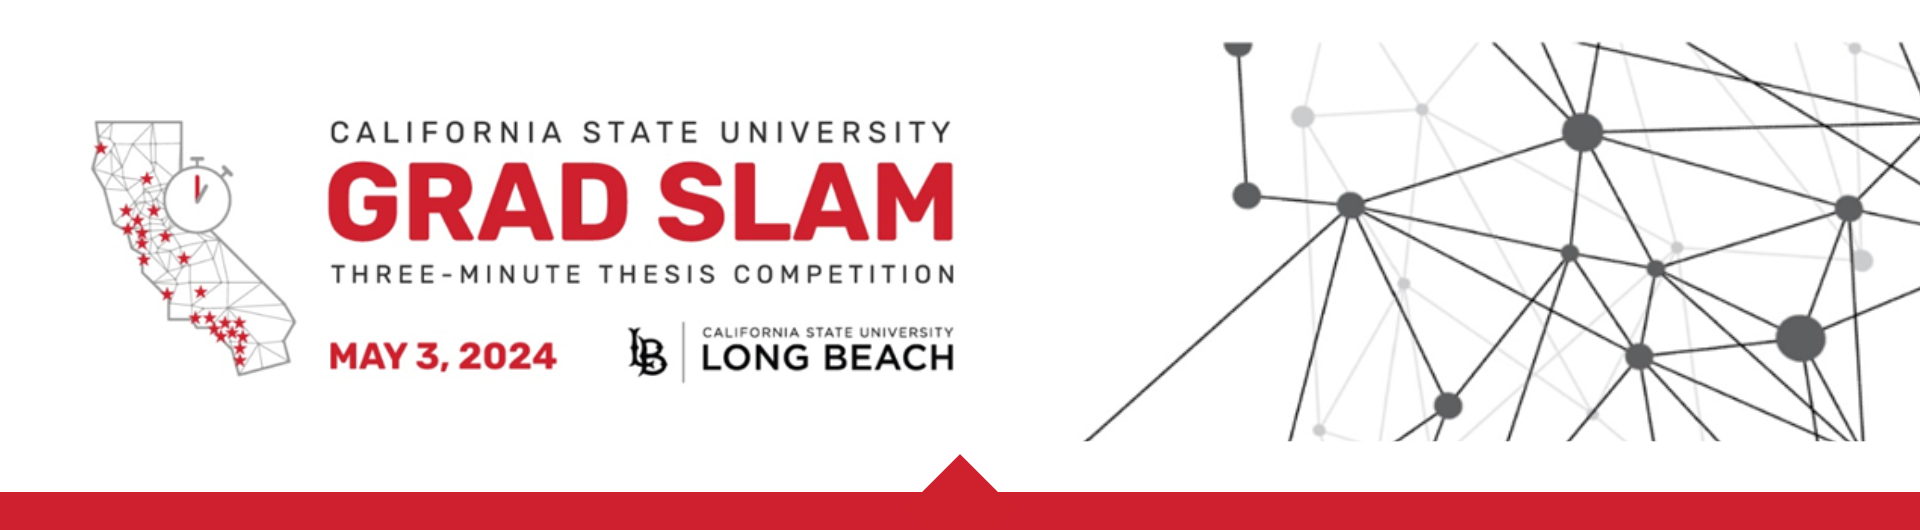 Web Banner saying California State University Grad Slam (three-minute thesis competition) May 3, 2024 with the CSULB Logo